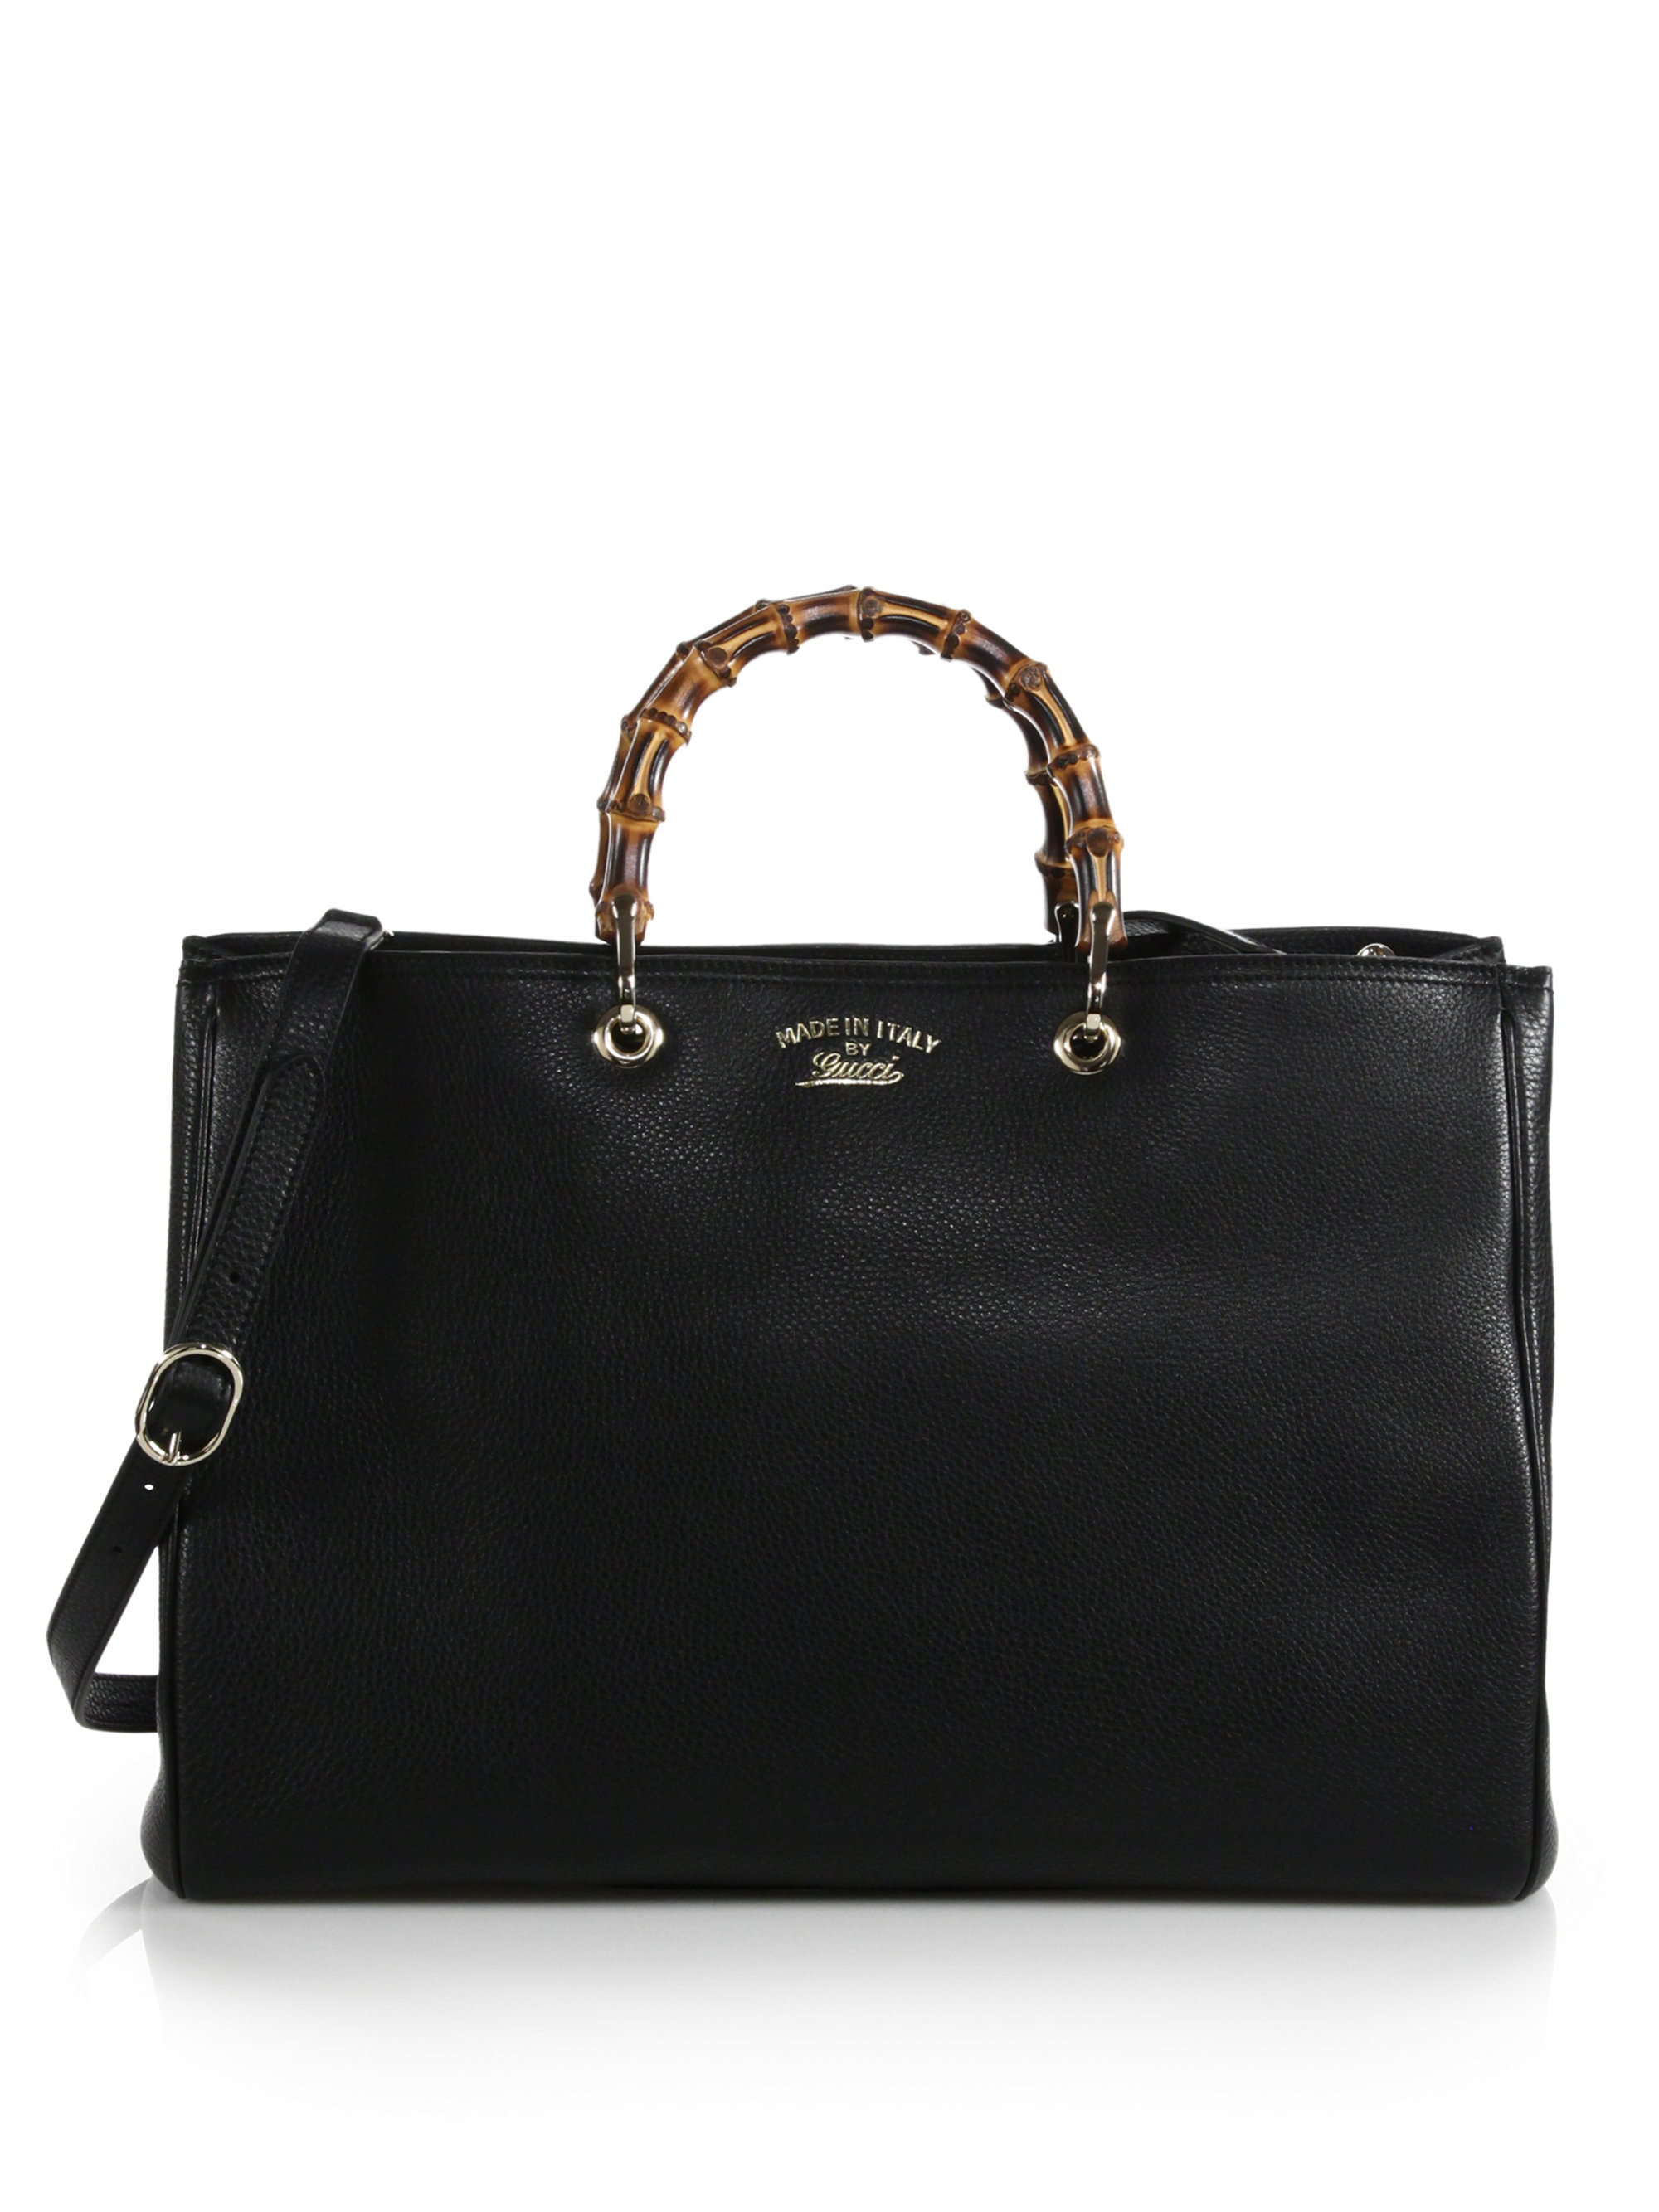 Gucci Bamboo Shopper Large Leather Tote in Nero-Black (Black) | Lyst